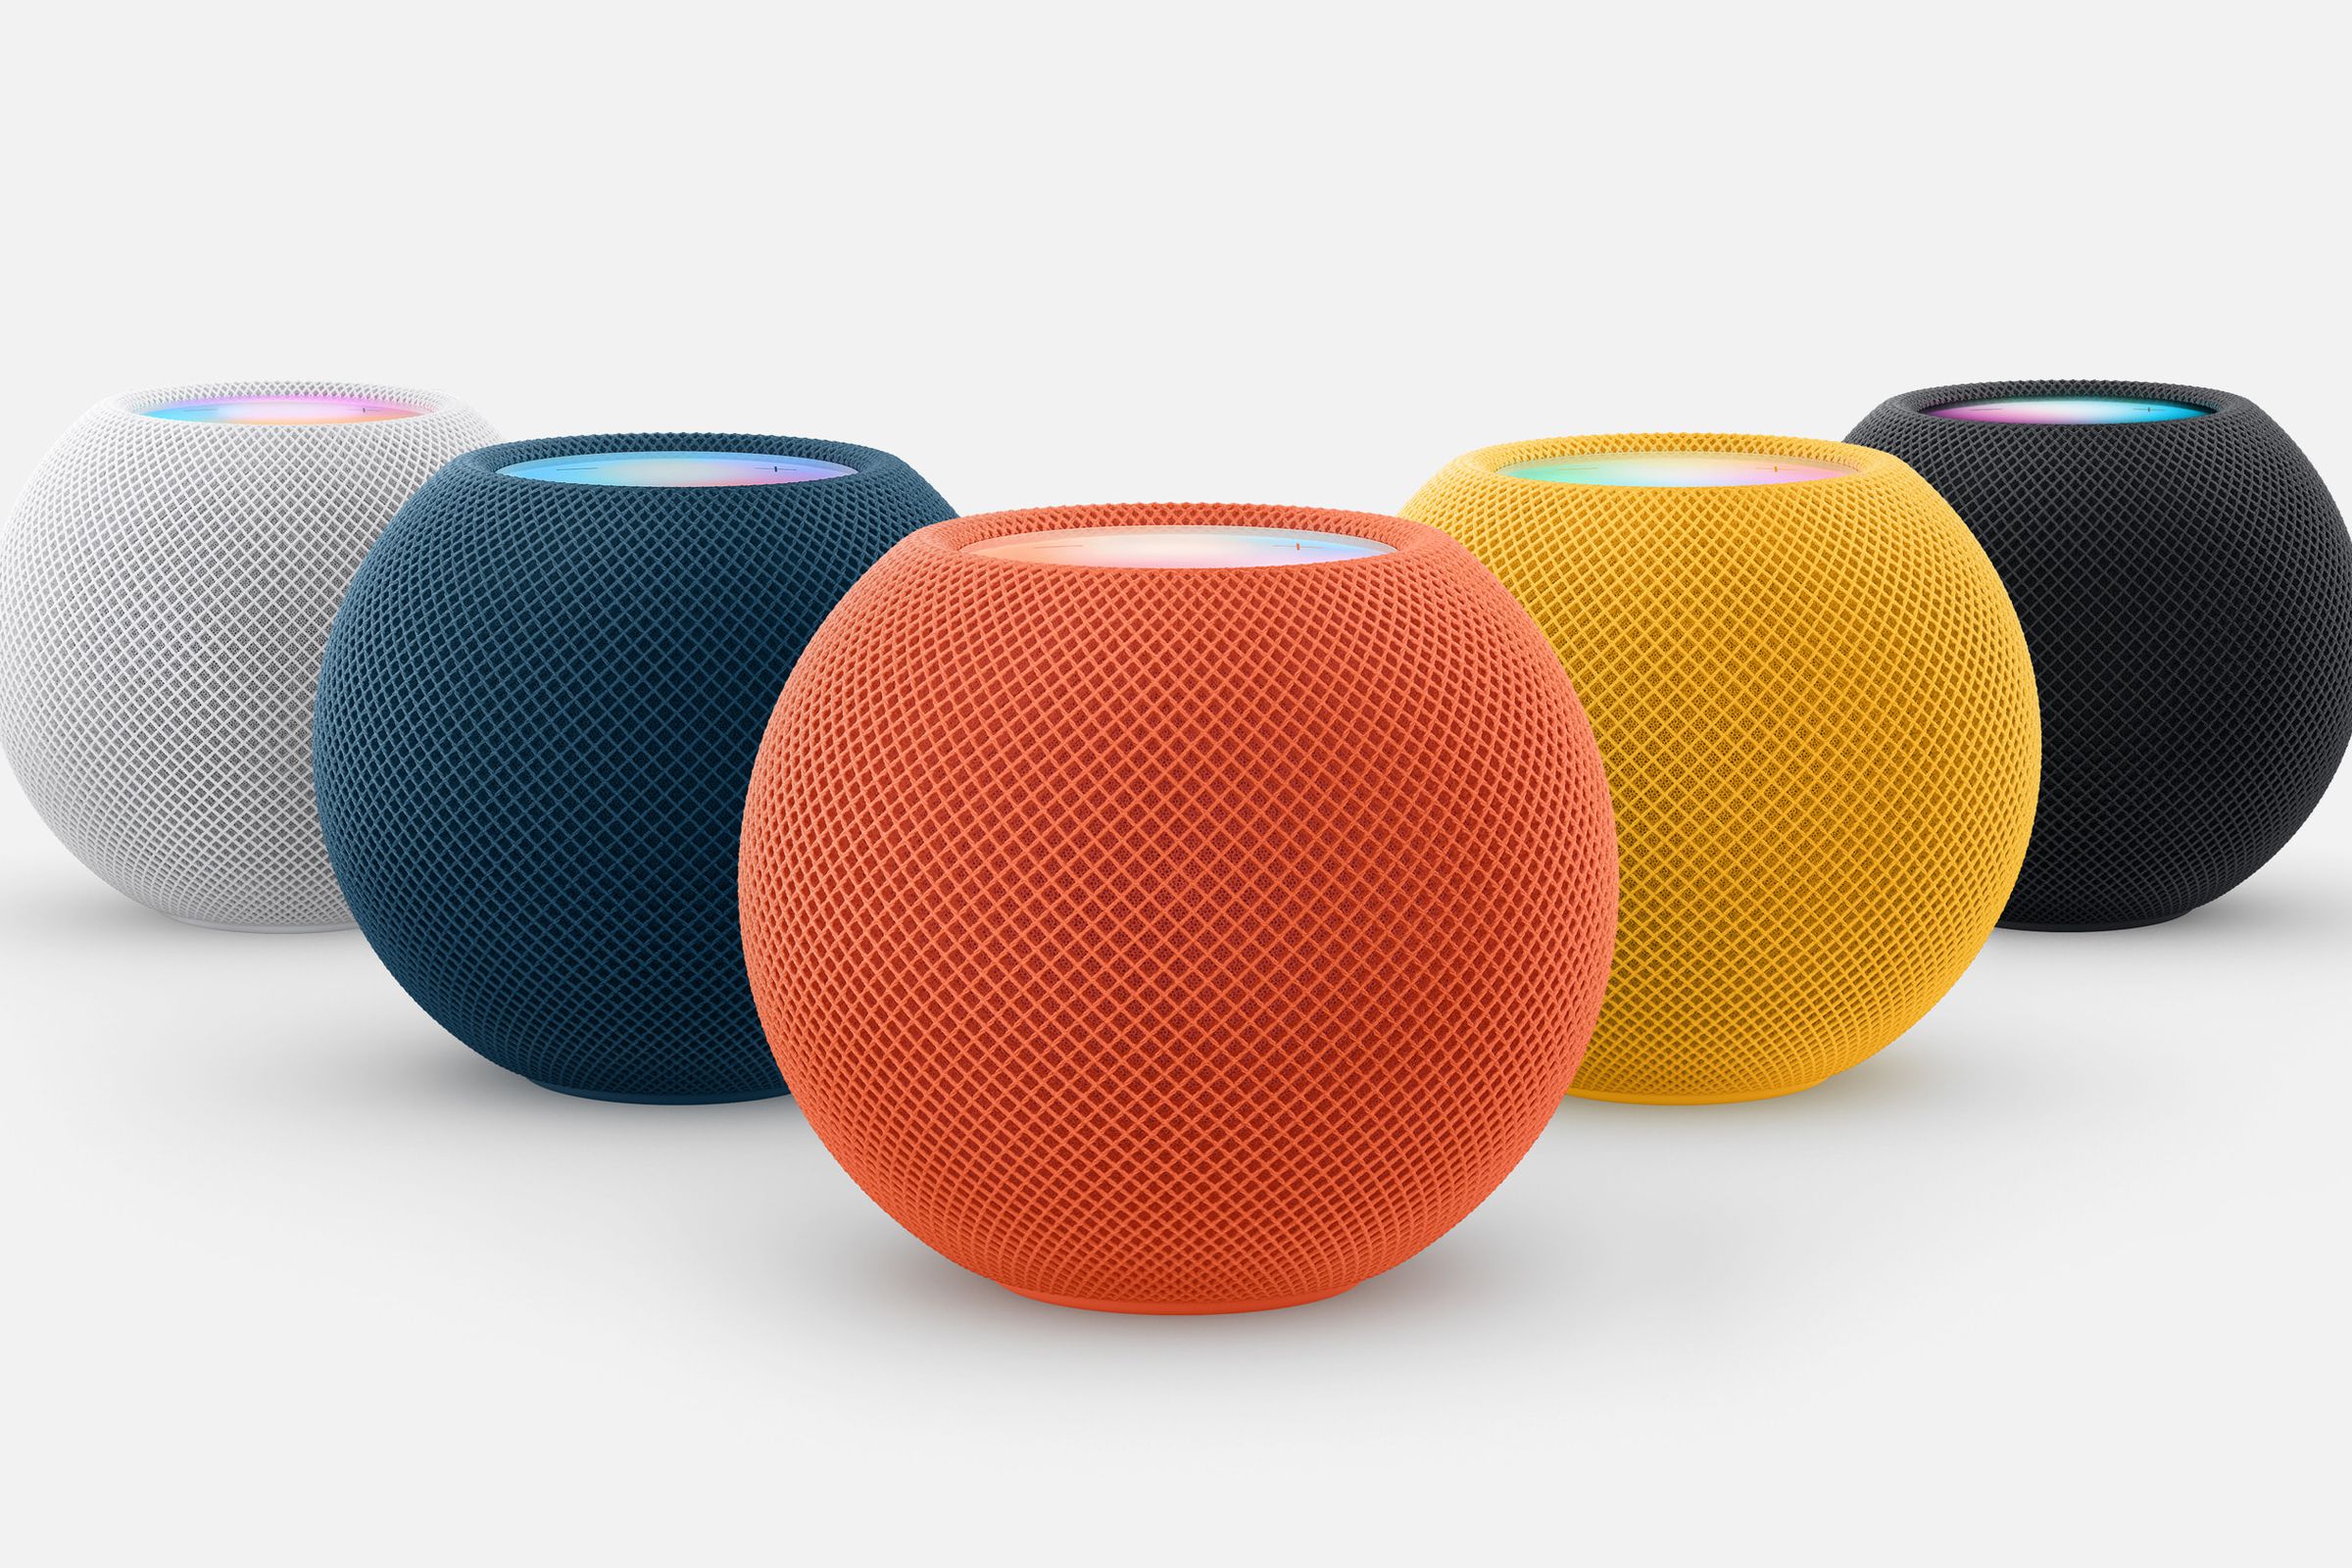 Apple’s HomePod Mini ... now in color.